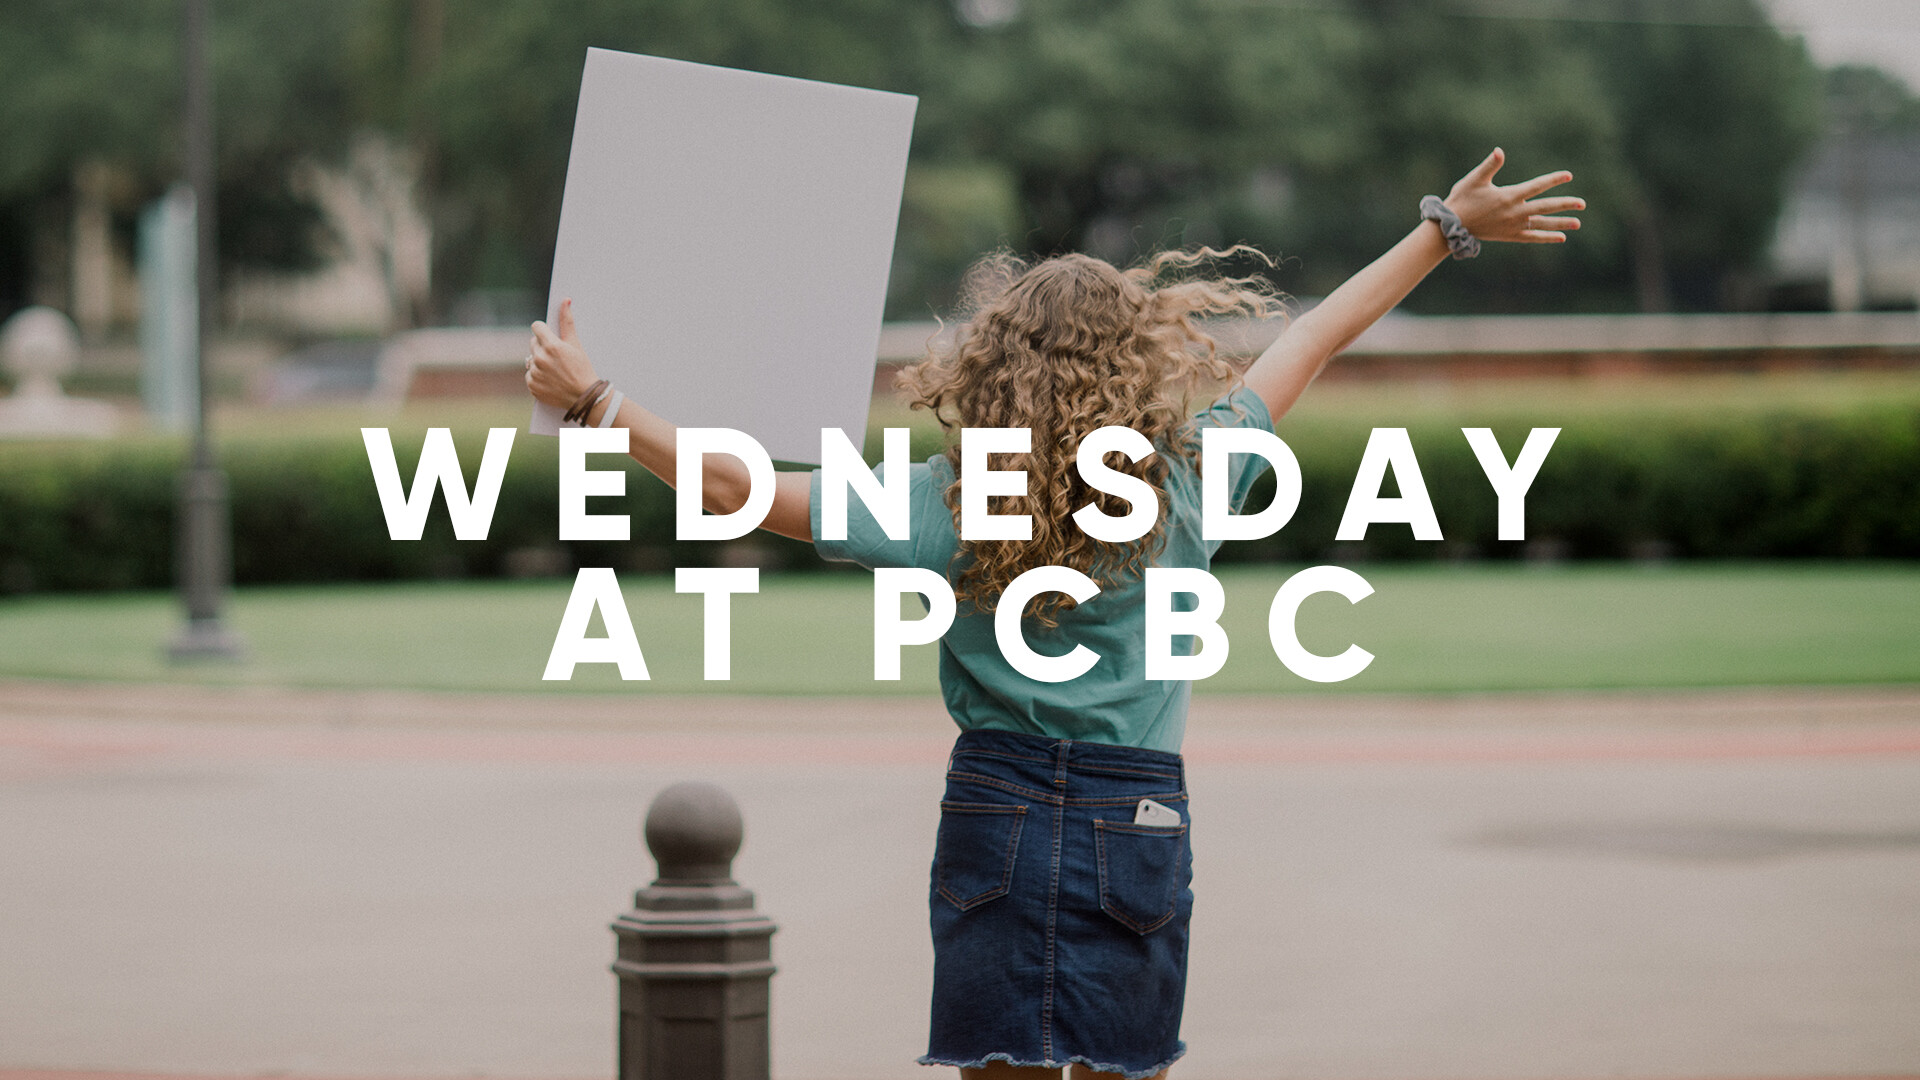 Wednesday at PCBC